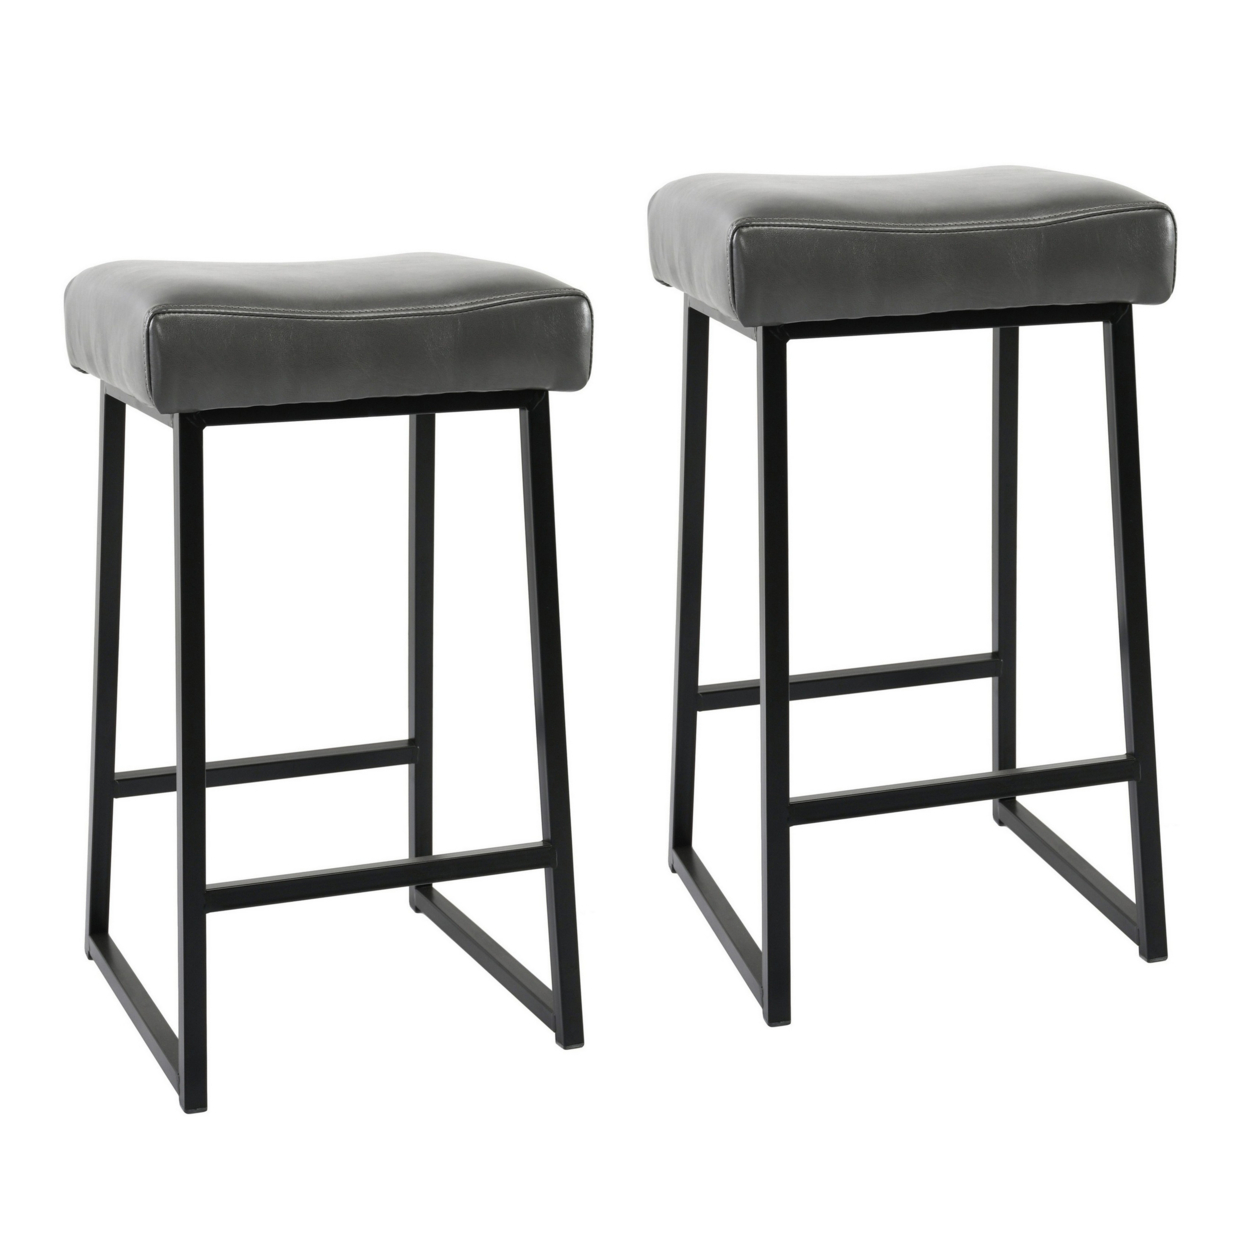 26 Inch Backless Counter Stool With Leatherette Seat, Set Of 2, Gray- Saltoro Sherpi